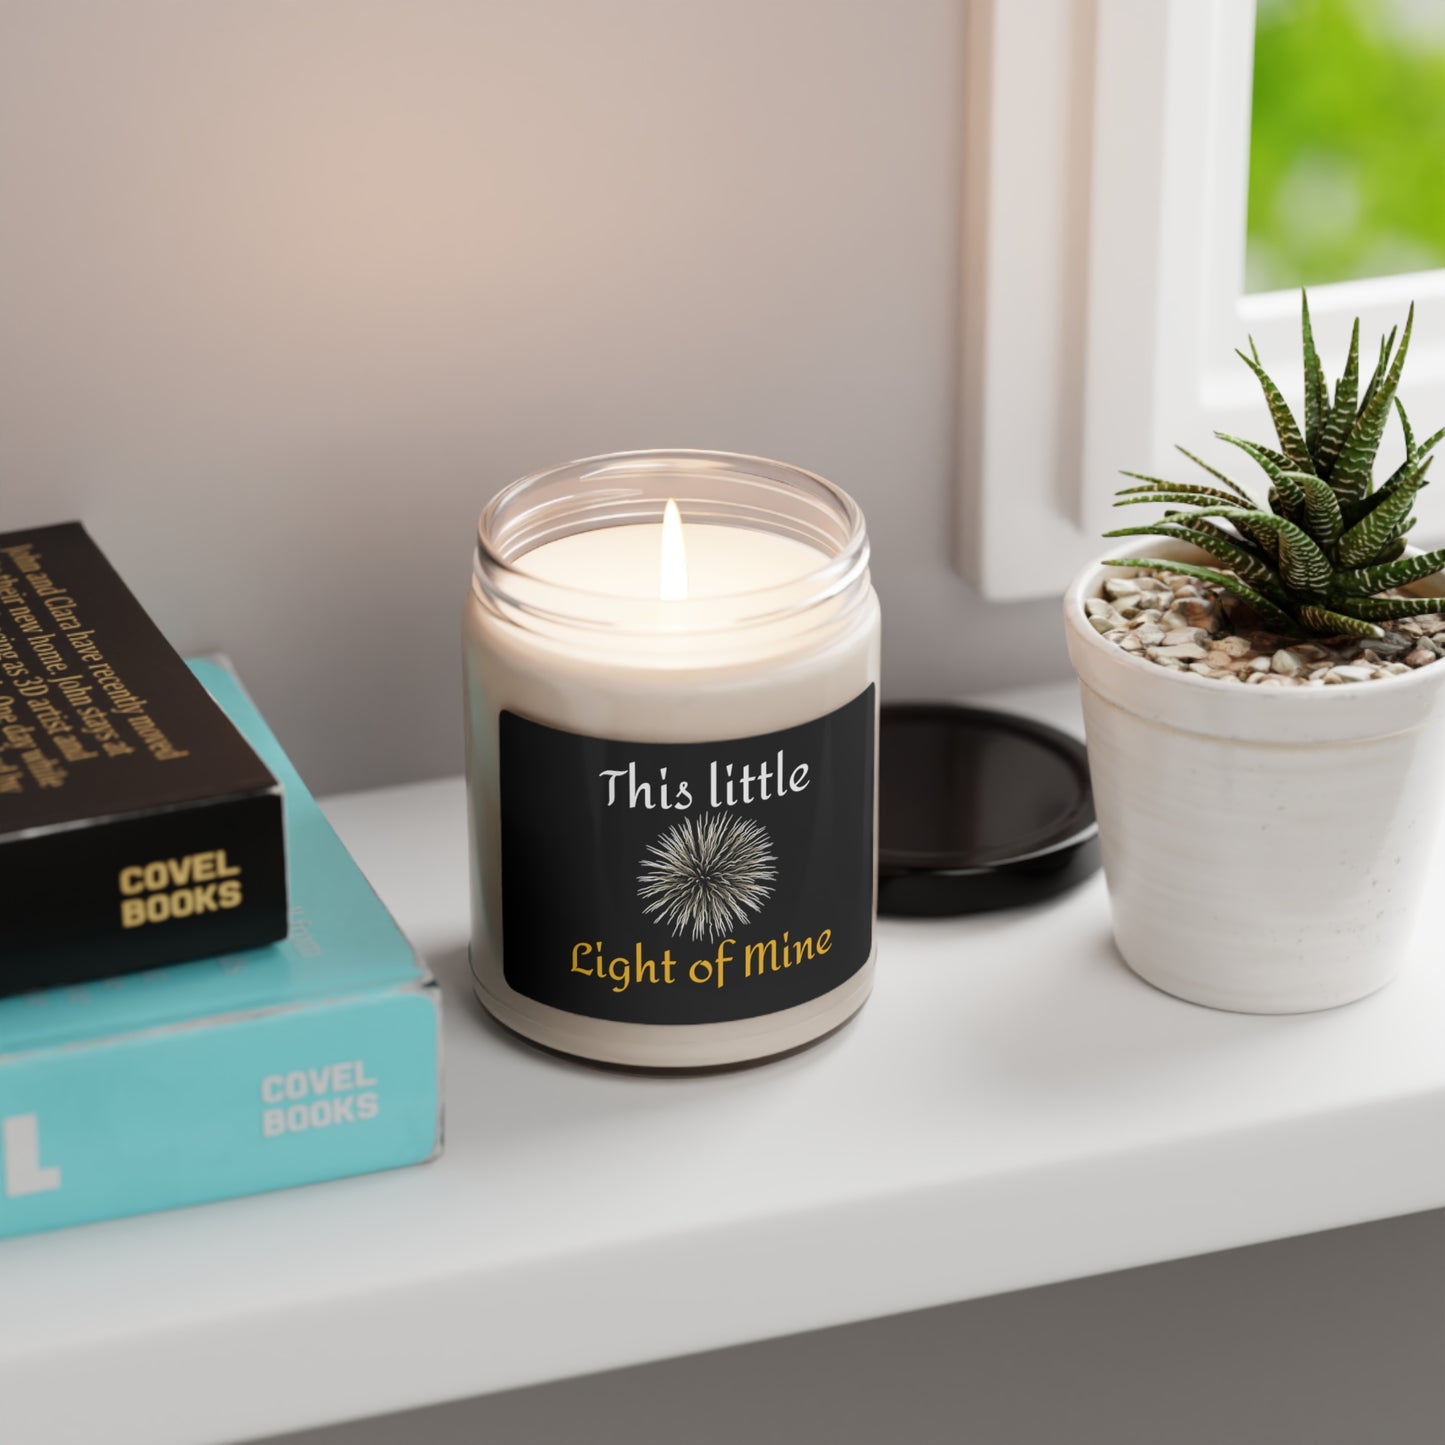 "This Little Light of Mine" Scented Candle